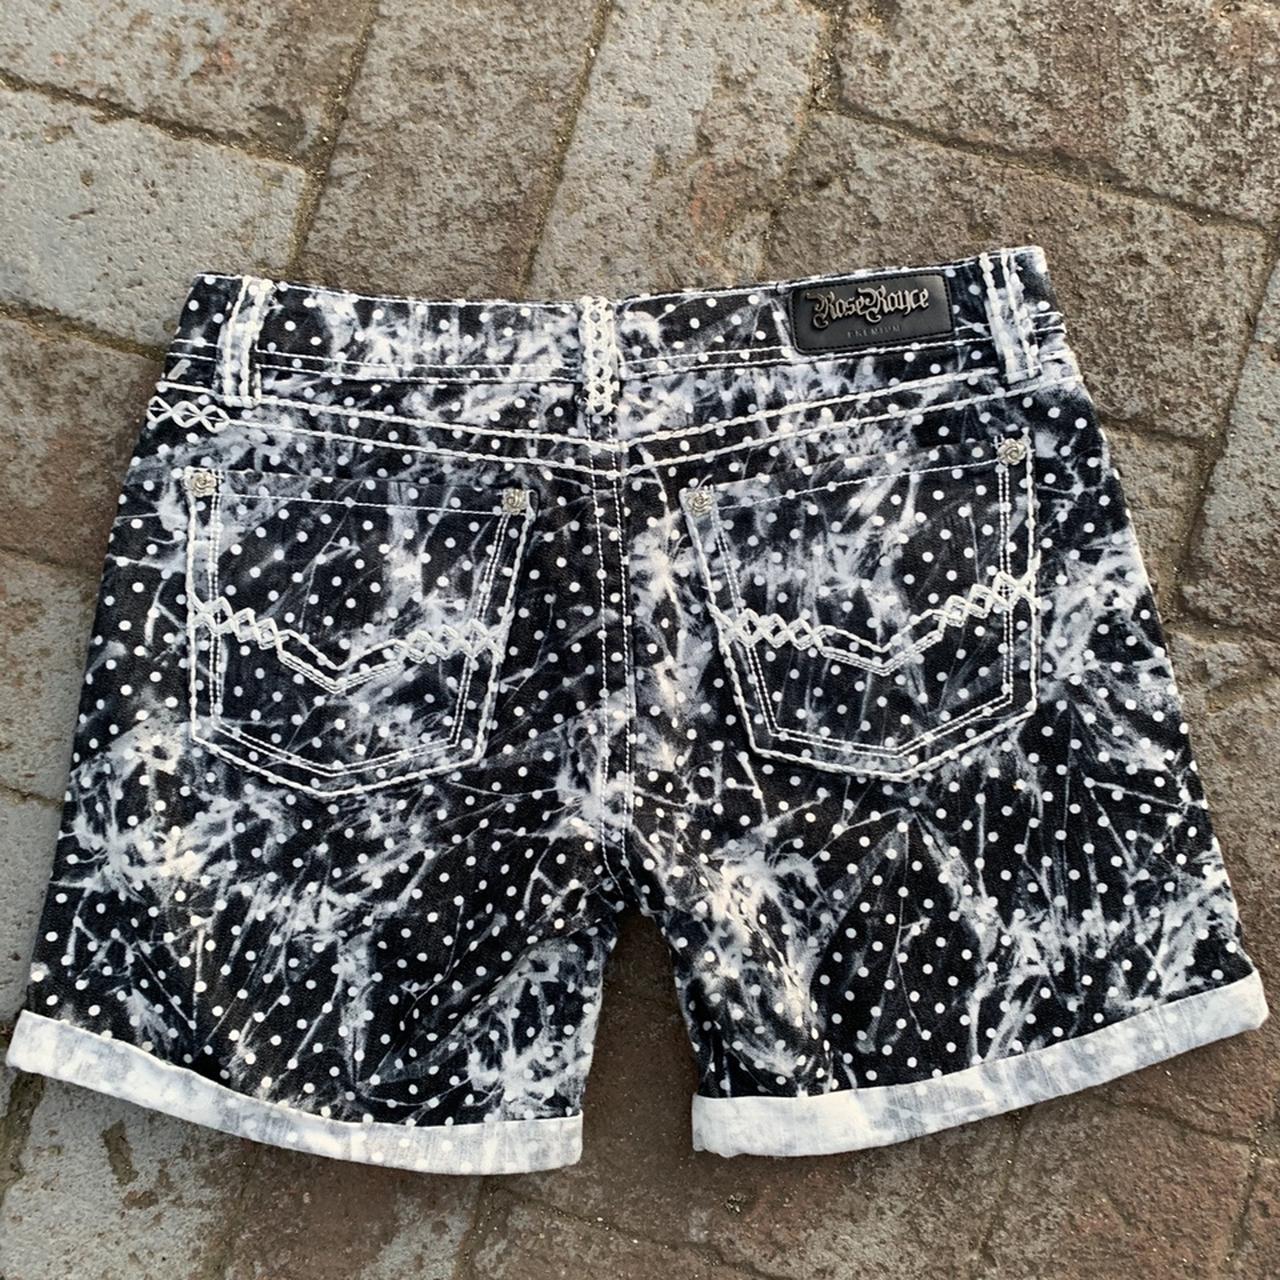 Product Image 2 - Rose Royce Shorts

New without tags

▪️All